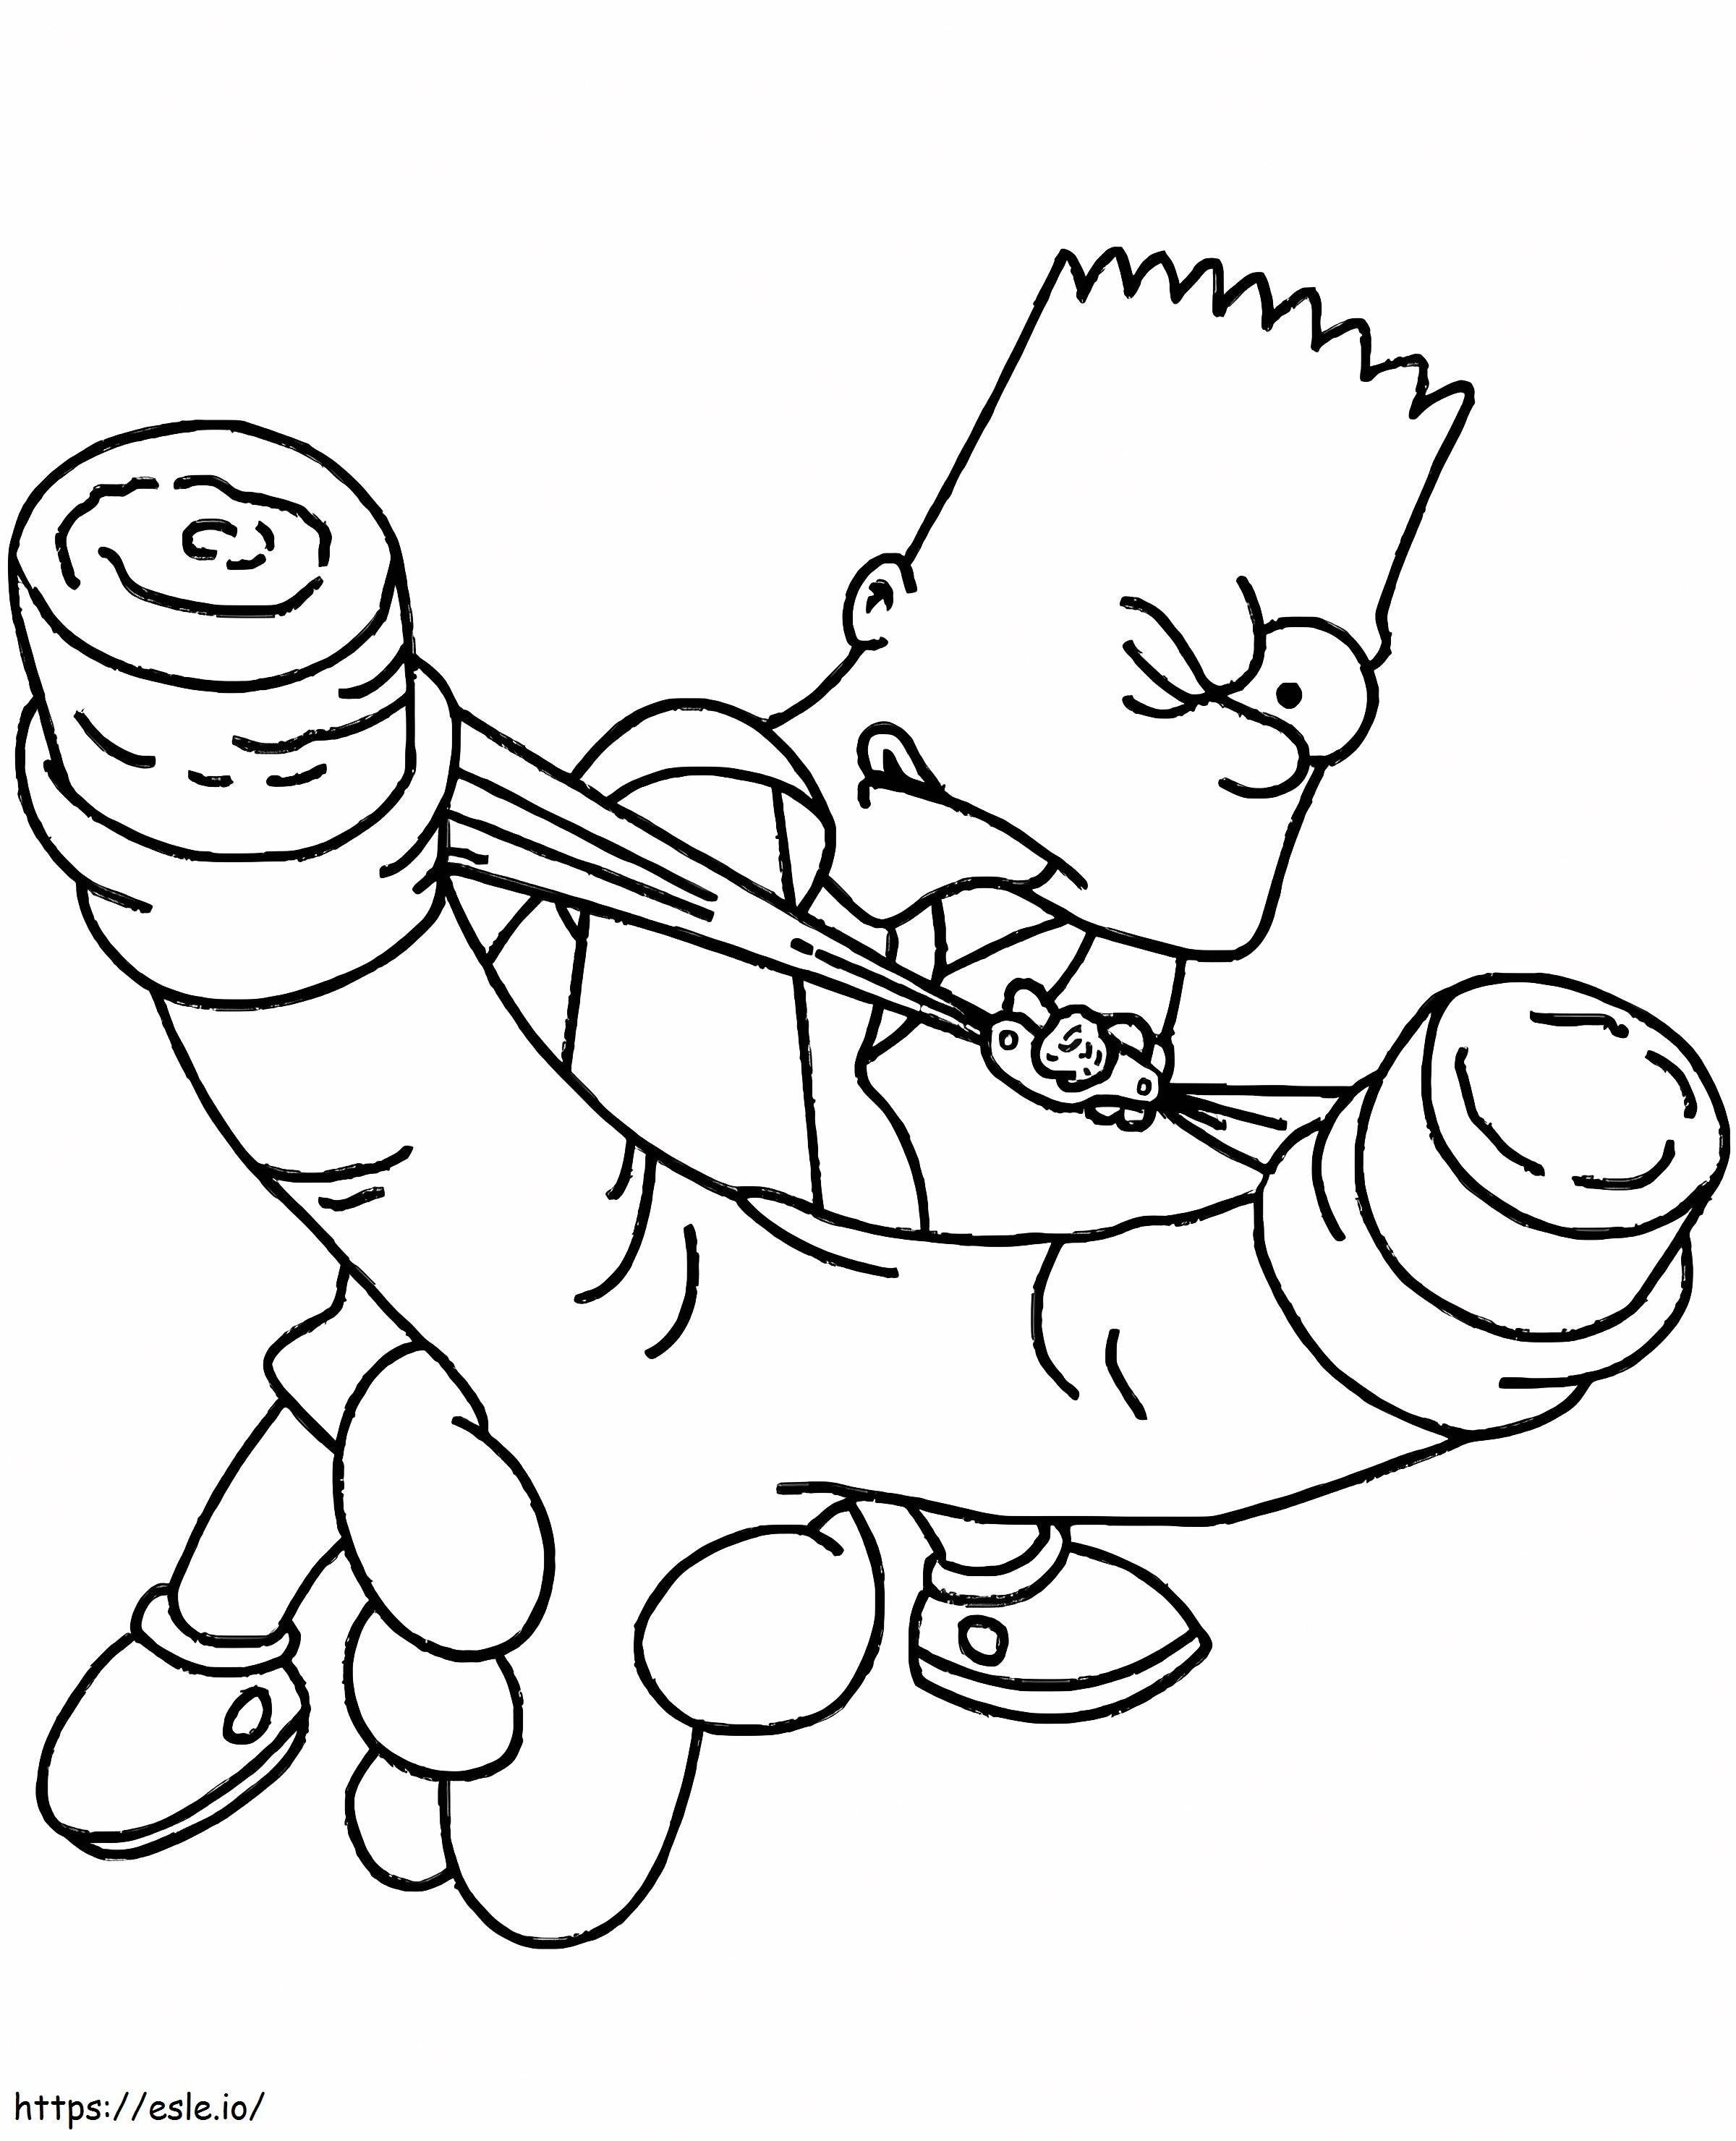 Bart Simpson 3 coloring page